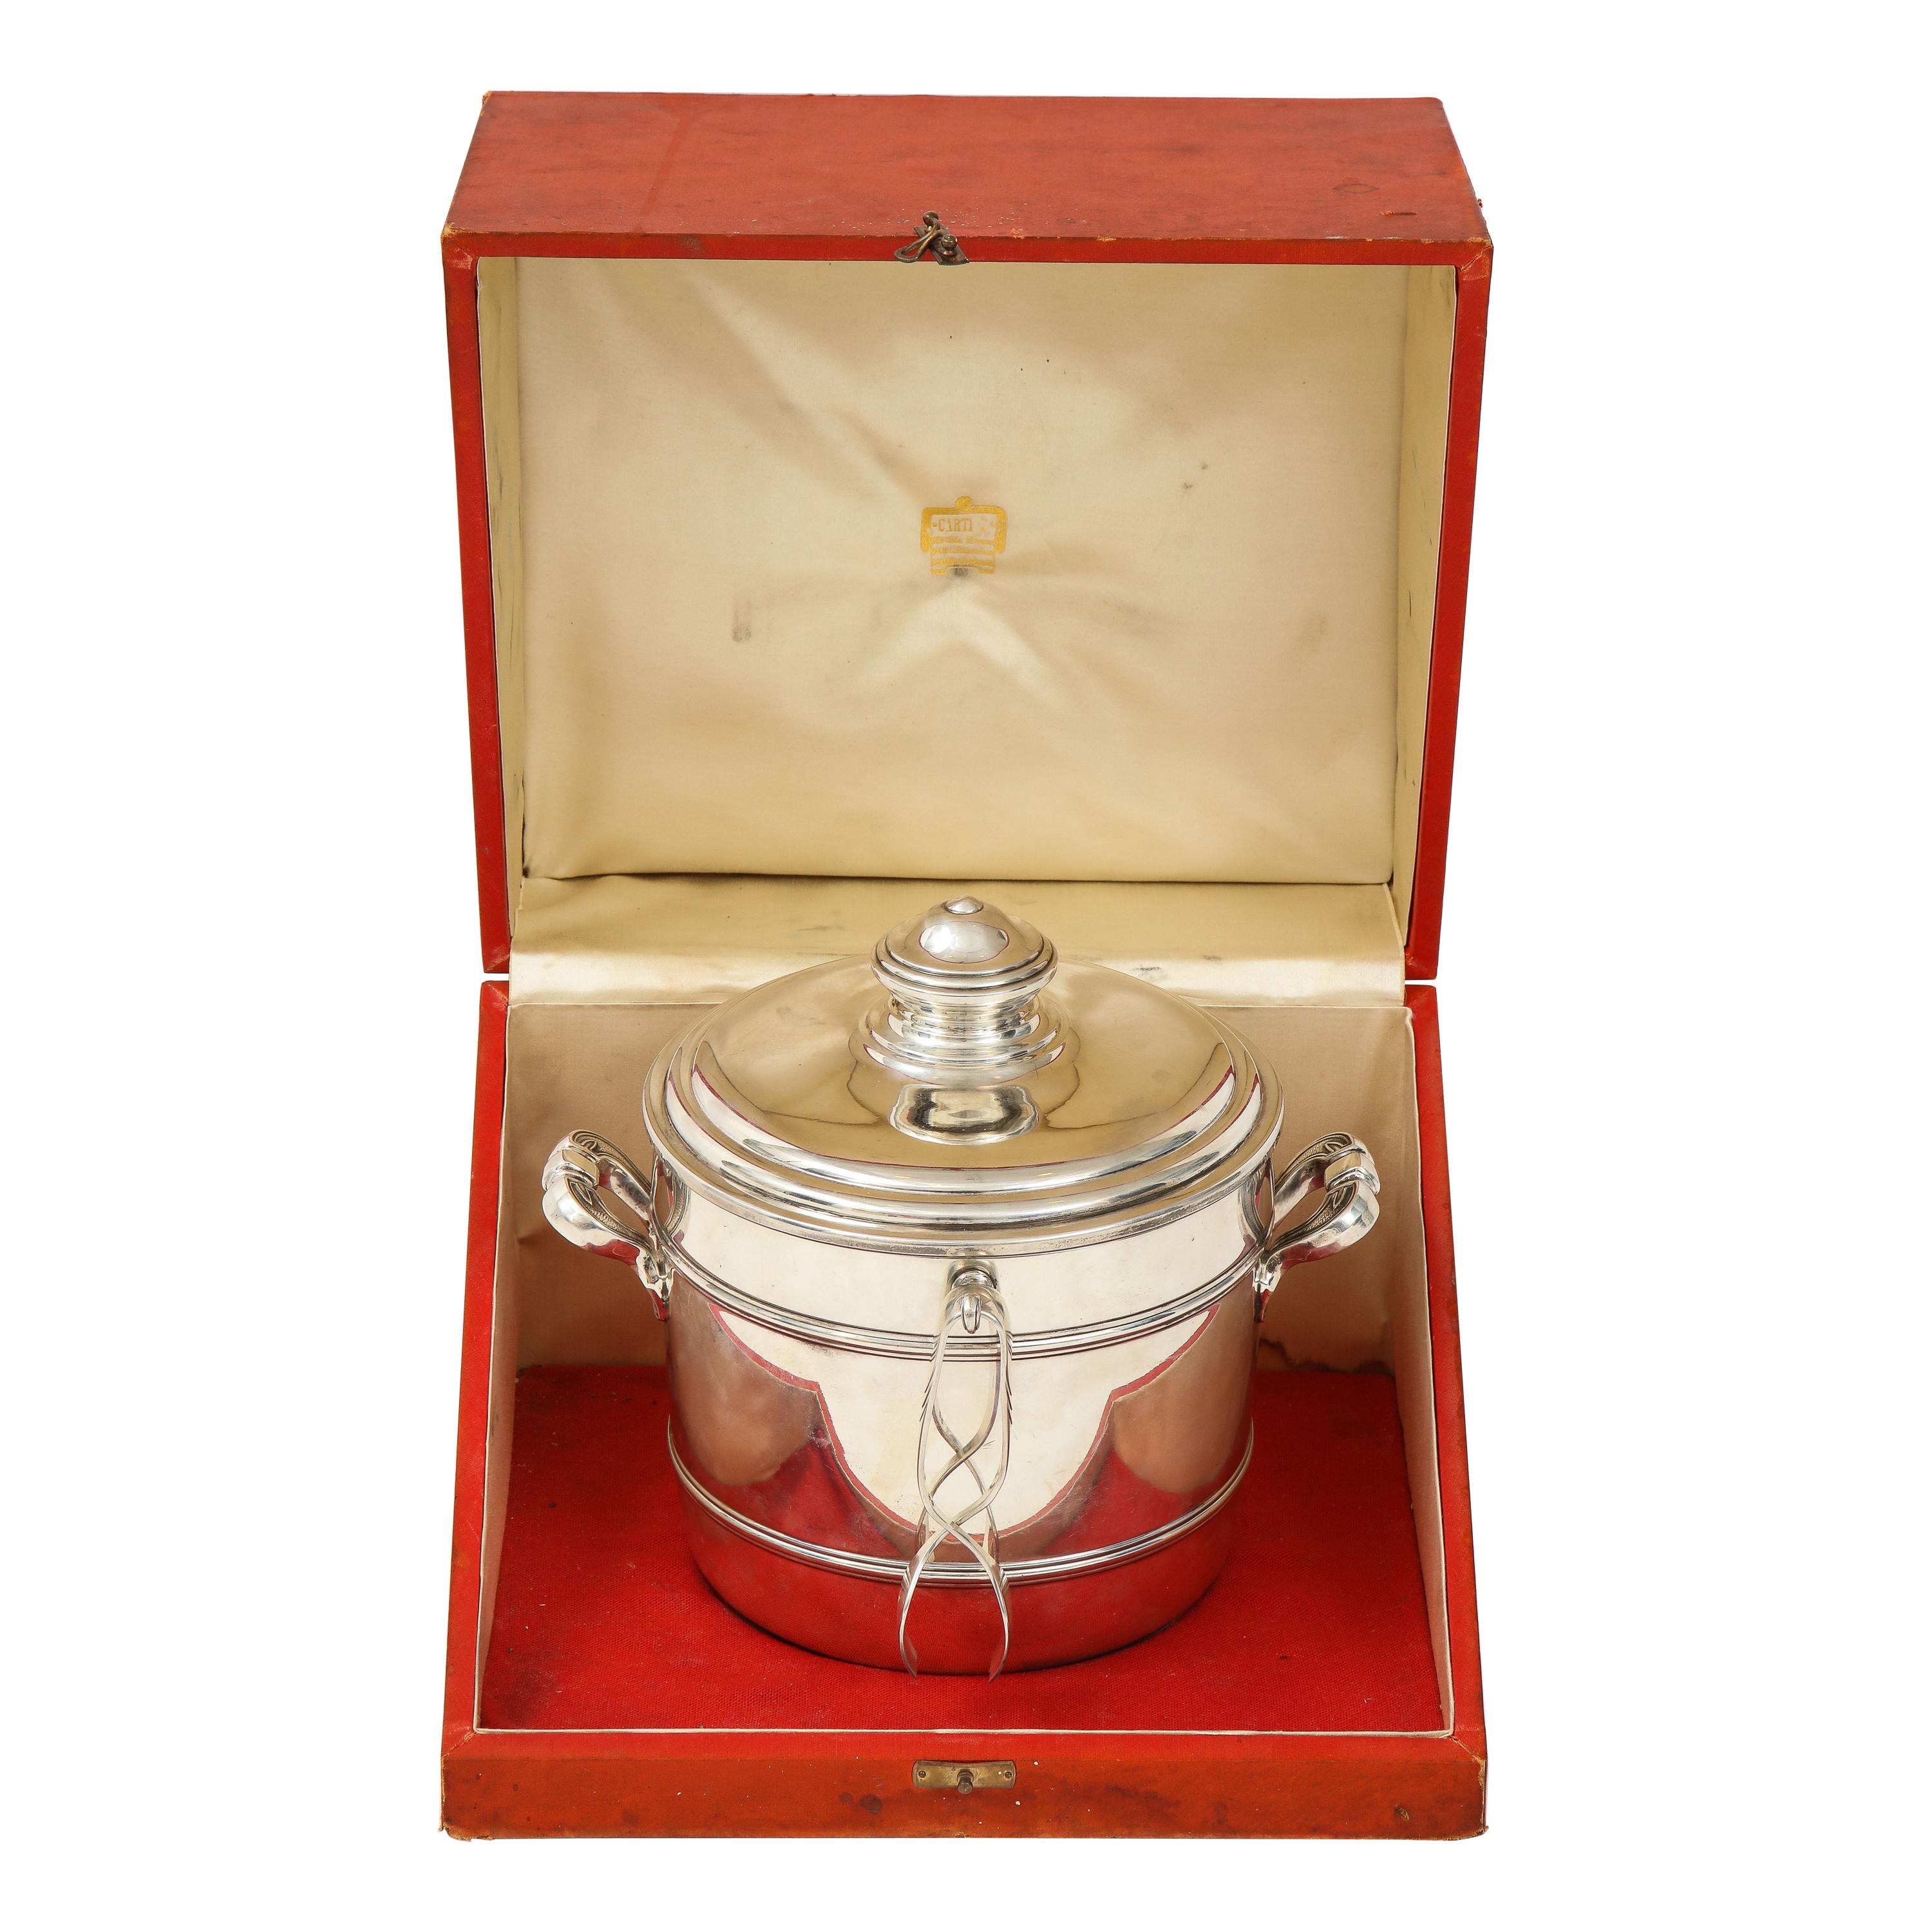 Cartier Sterling Silver Art Deco Ice Bucket with Ice Tongs and Original Box